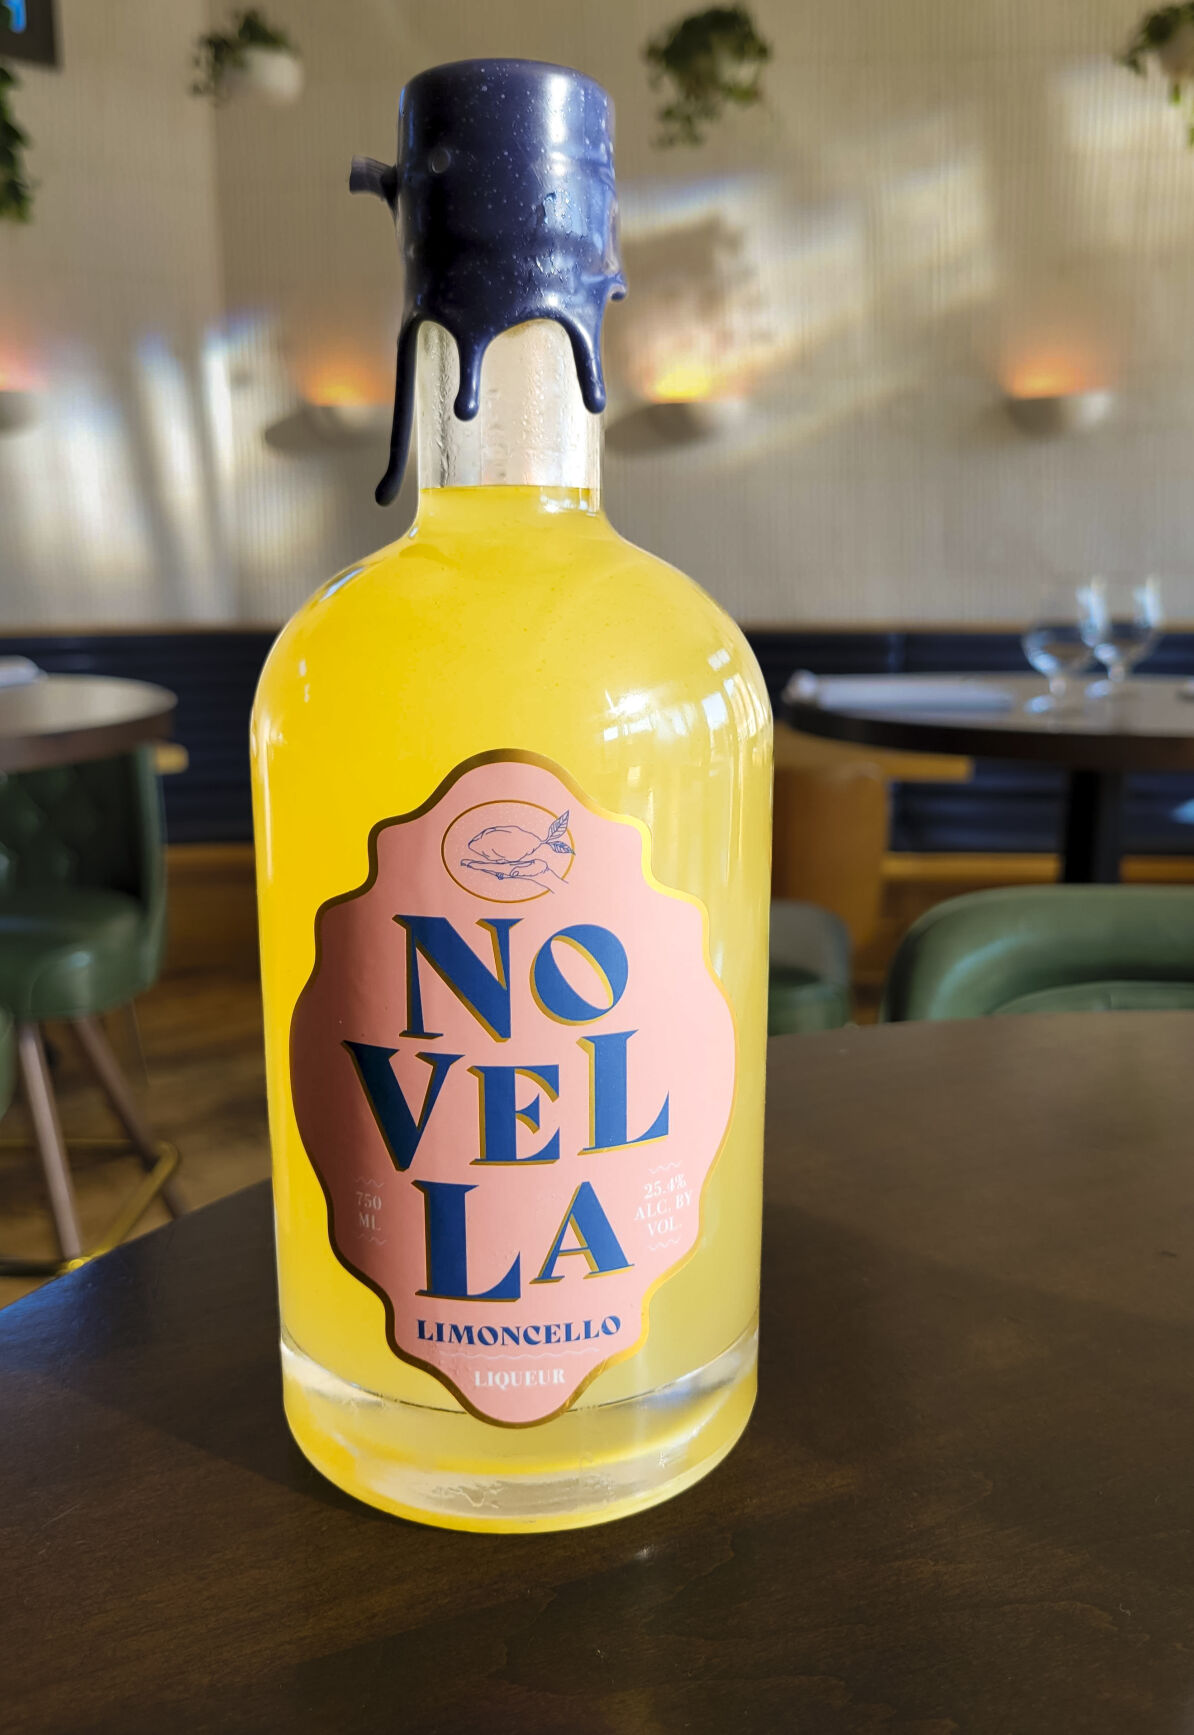 Phil Your Glass: Limoncello is the perfect elixir for holiday overindulgence